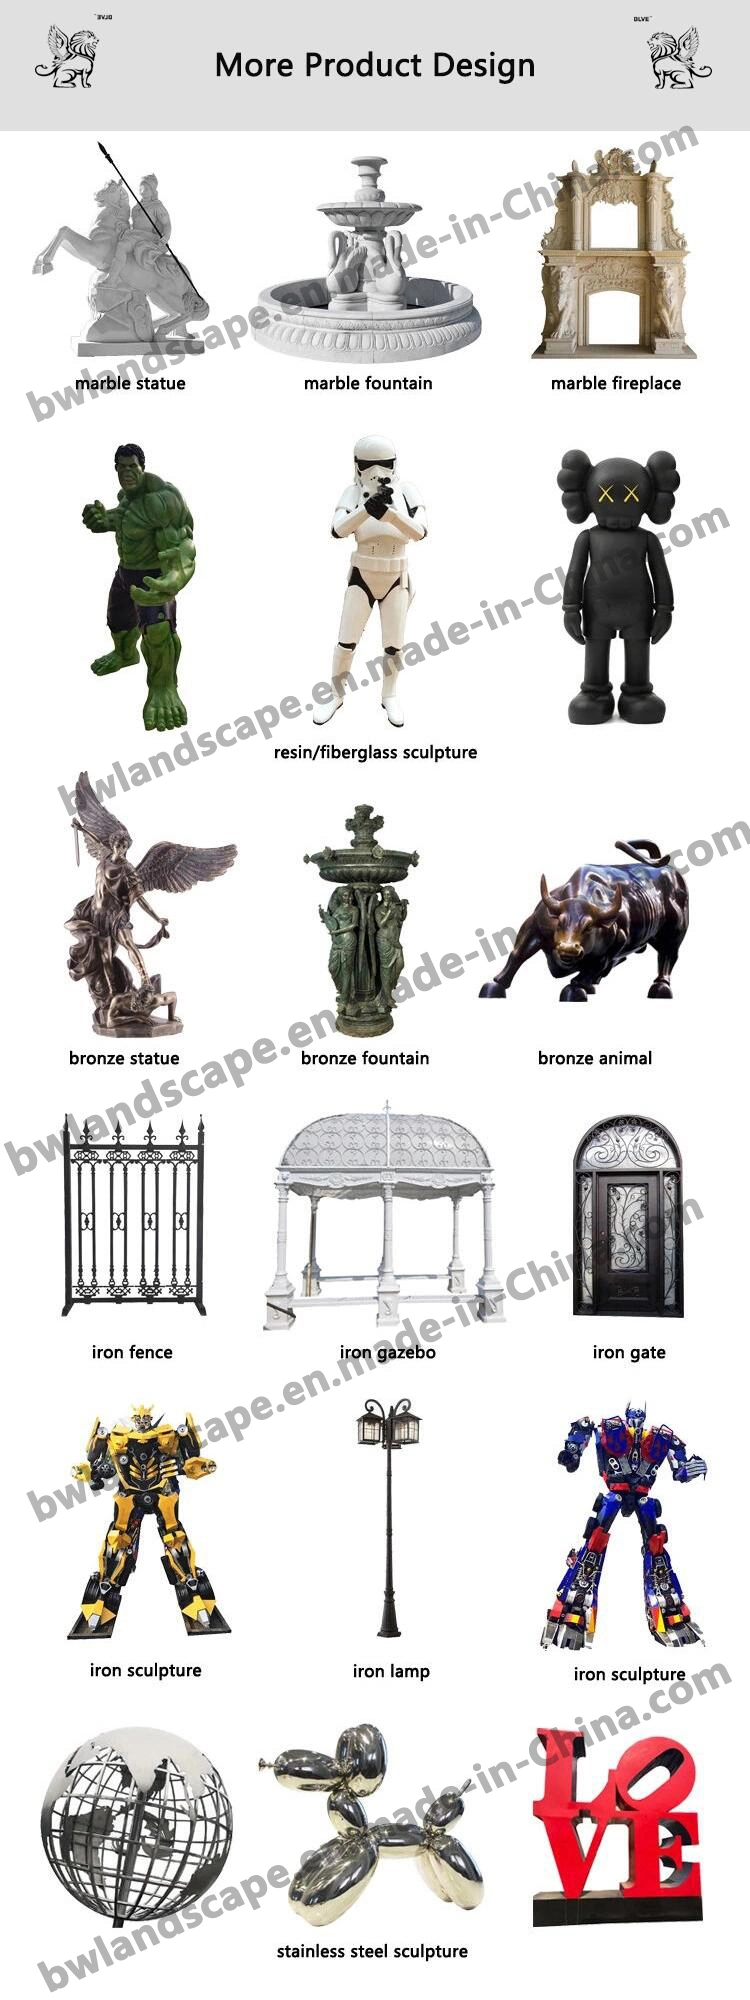 Custom Large Outdoor Decoration Handcarved Animal Marble Lion Statues Masg-37